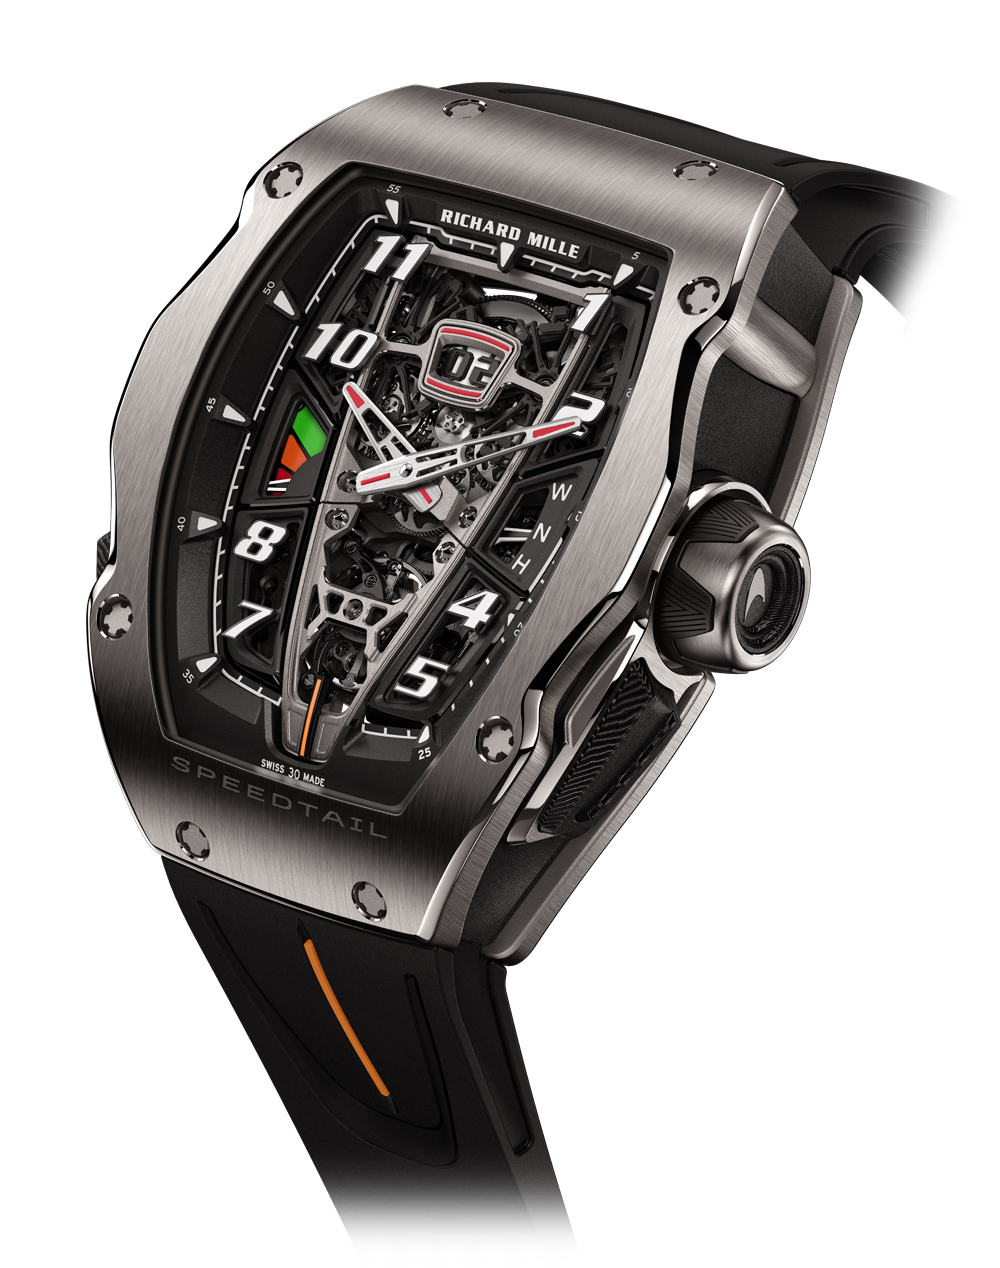 Richard Mille RM16 Full Rose Gold Transparent Skeleton Dial Watch RM016Richard Mille Automatic Winding CARBON TPT - RM 037